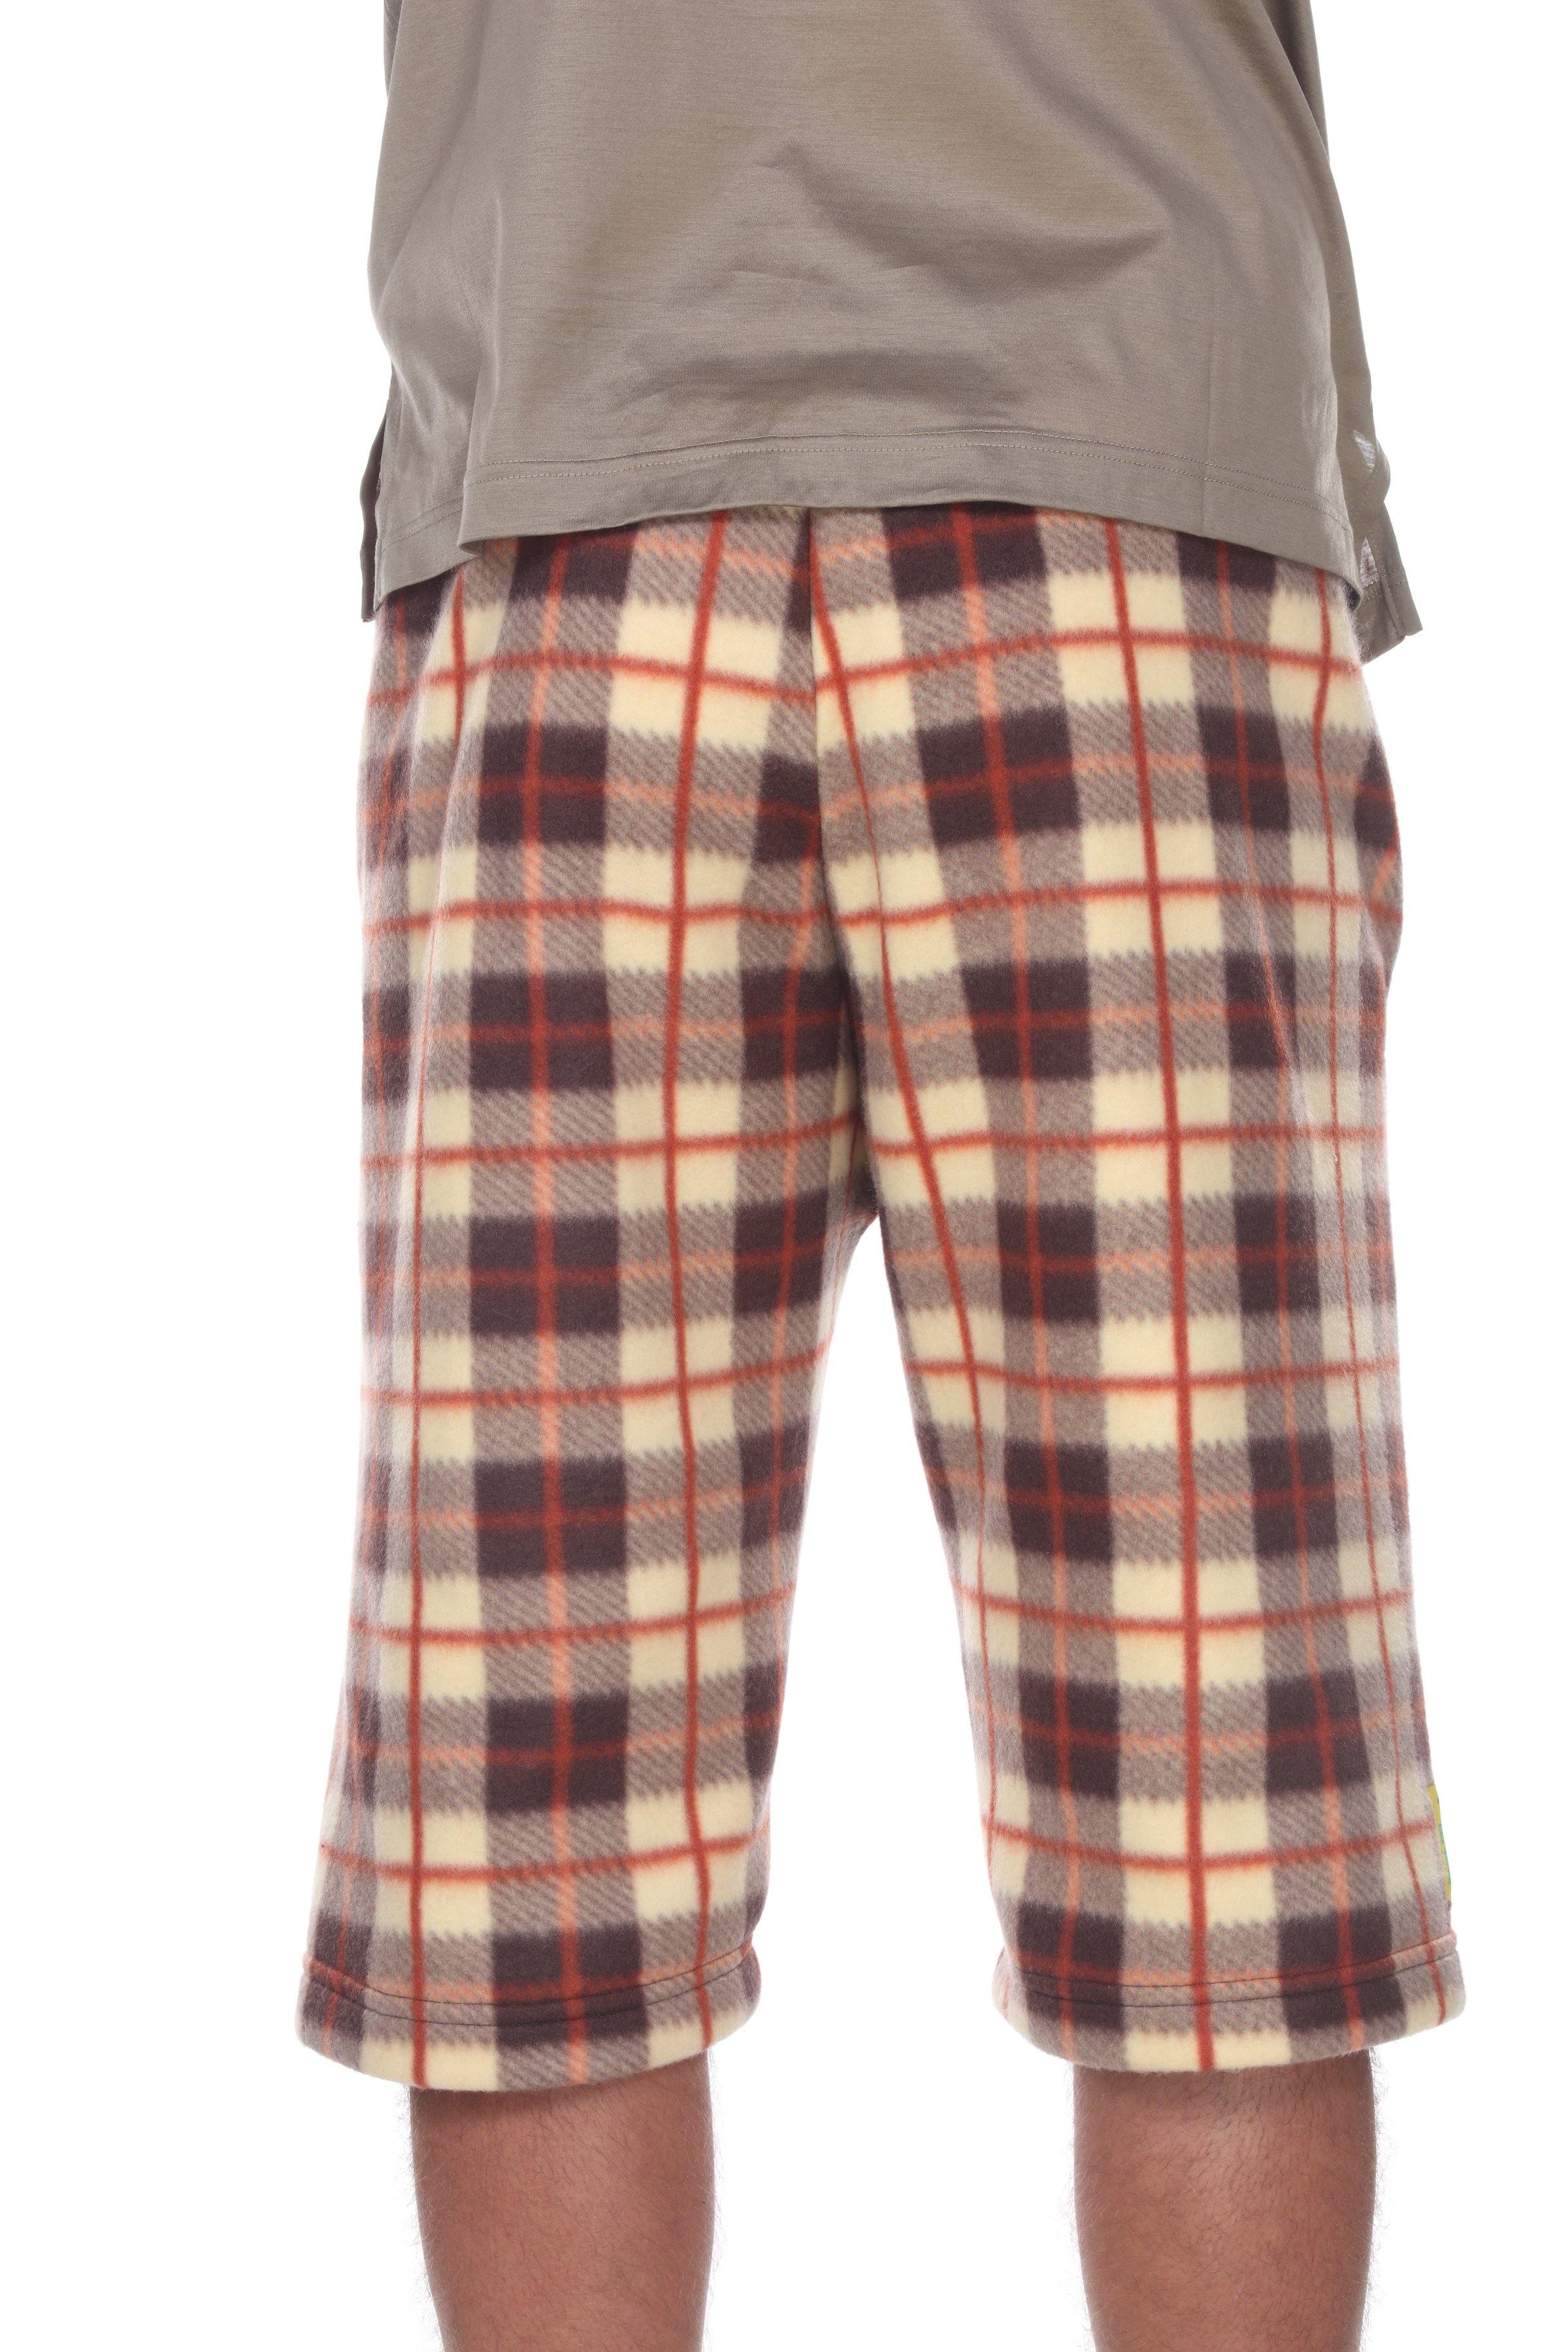 Mens - Brulee Plaid - Fuzzy Duds